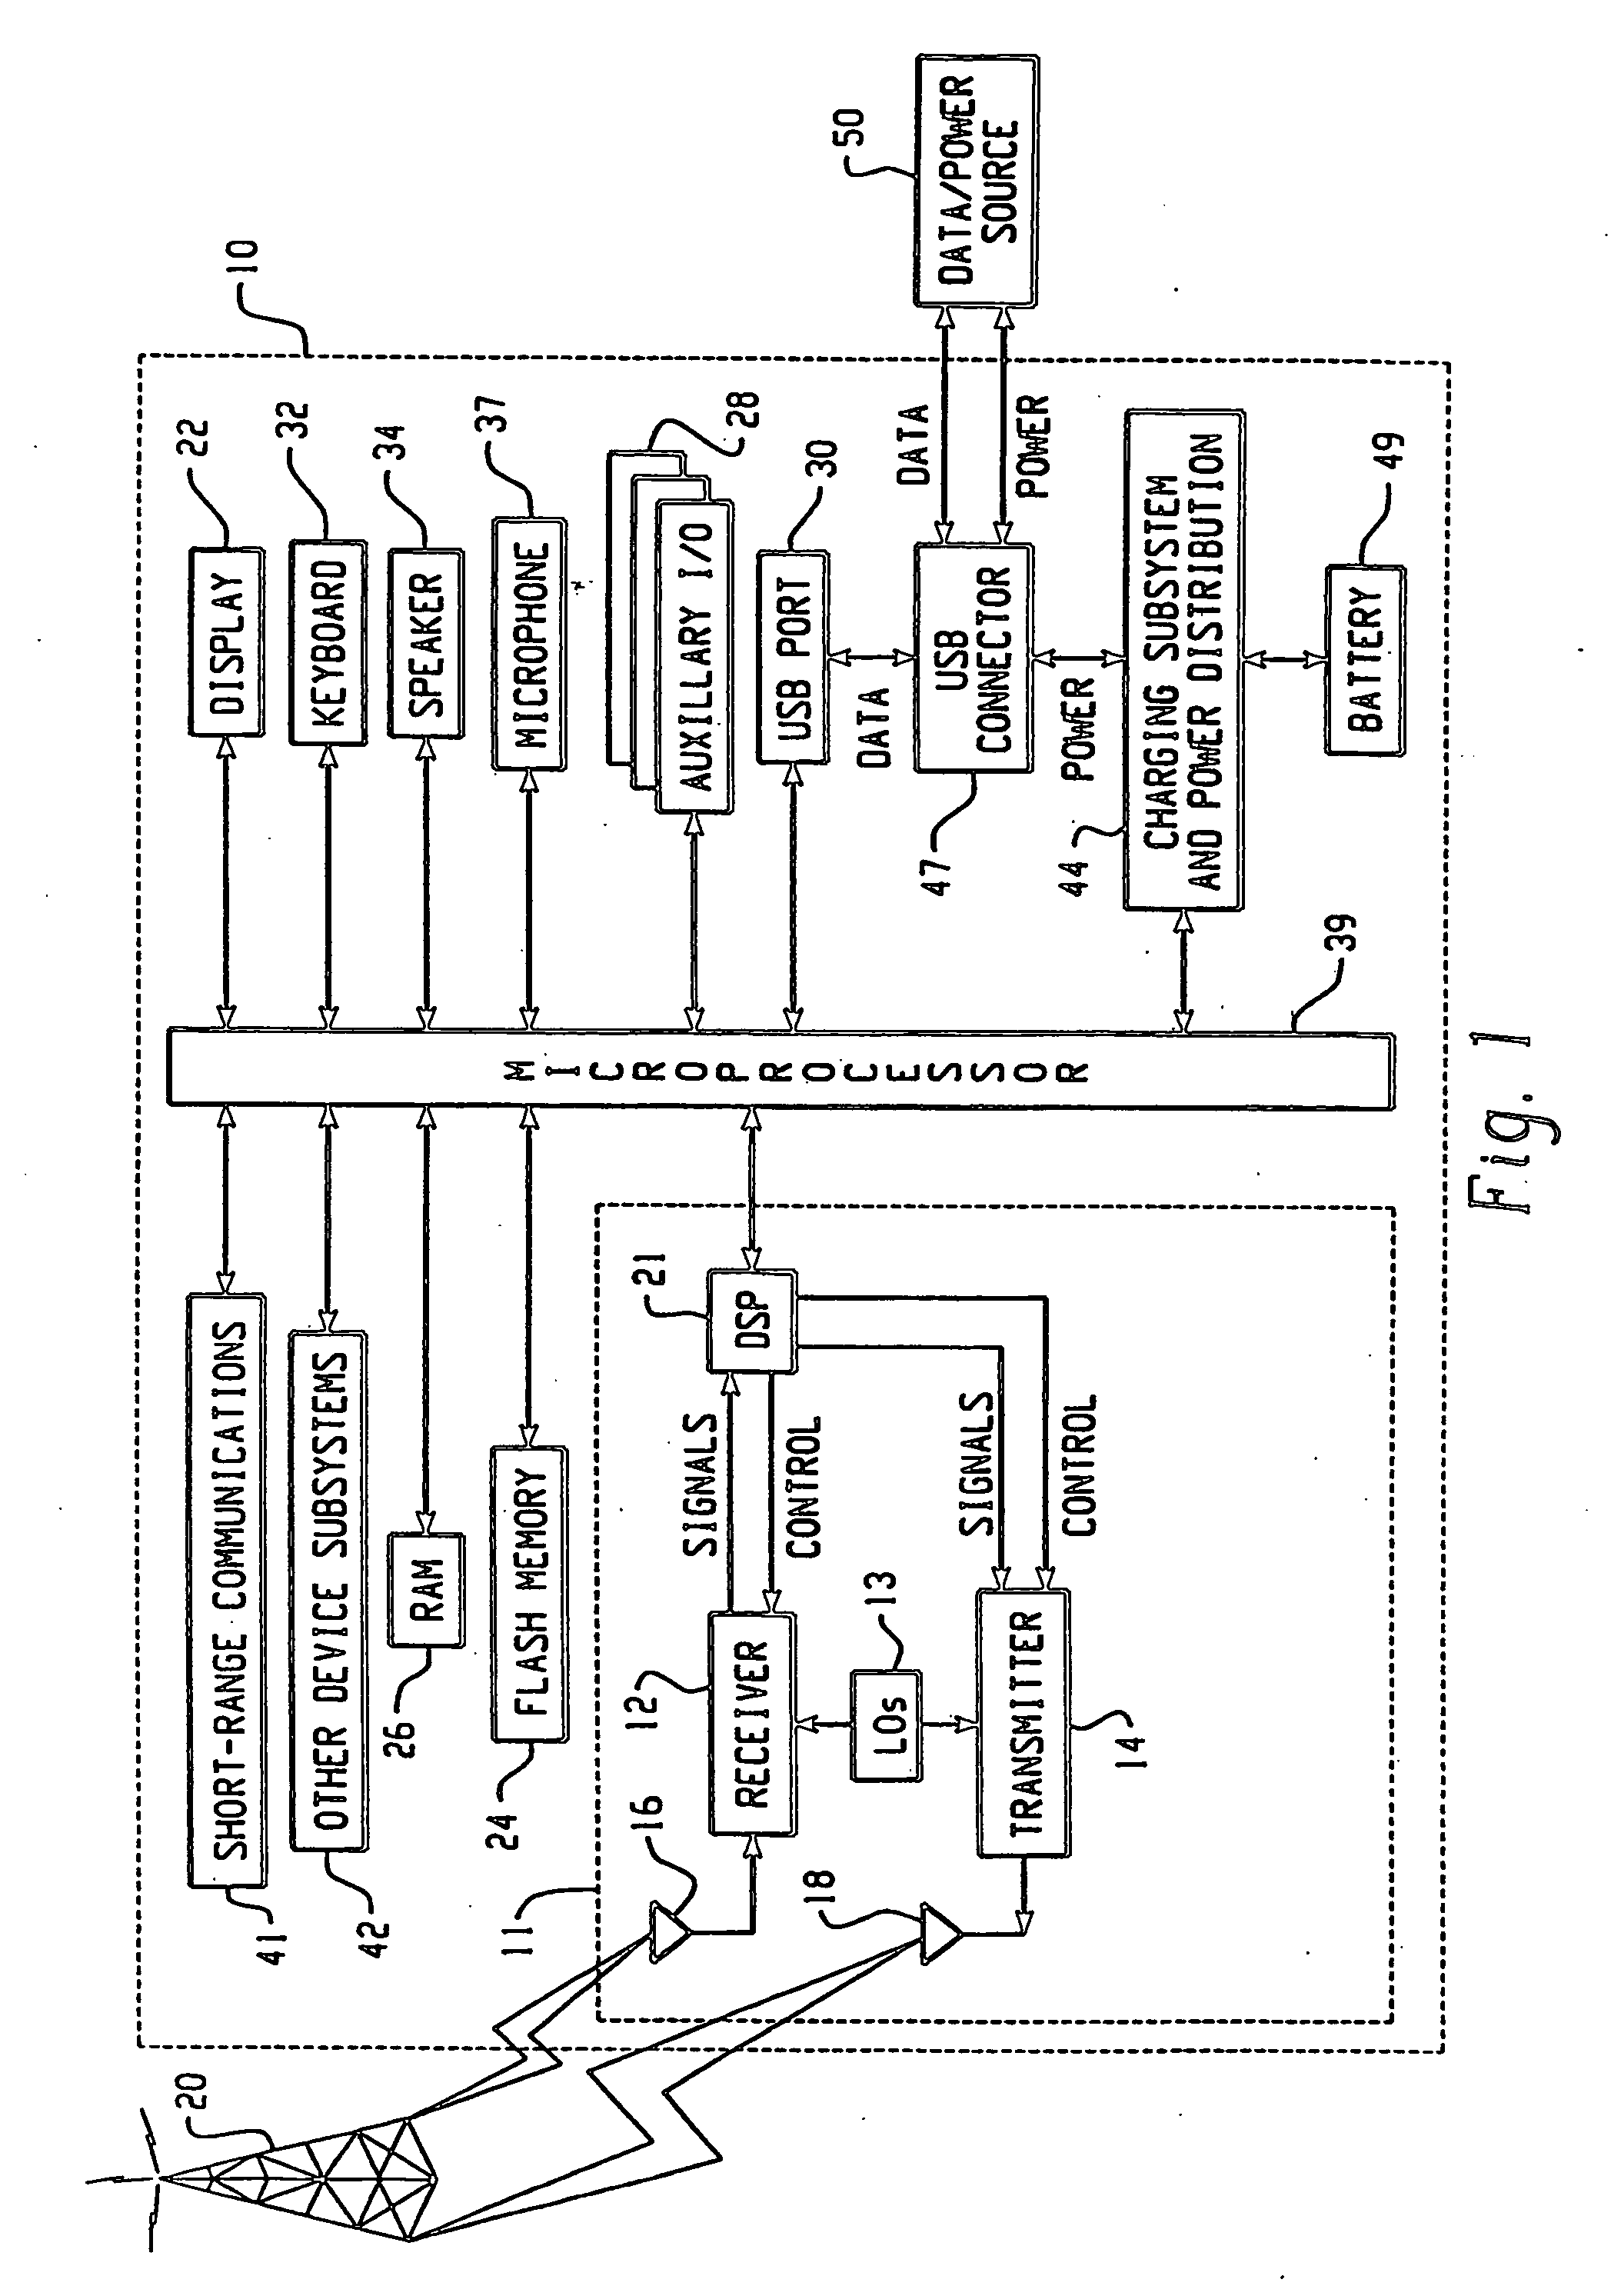 Method of system access to a wireless network